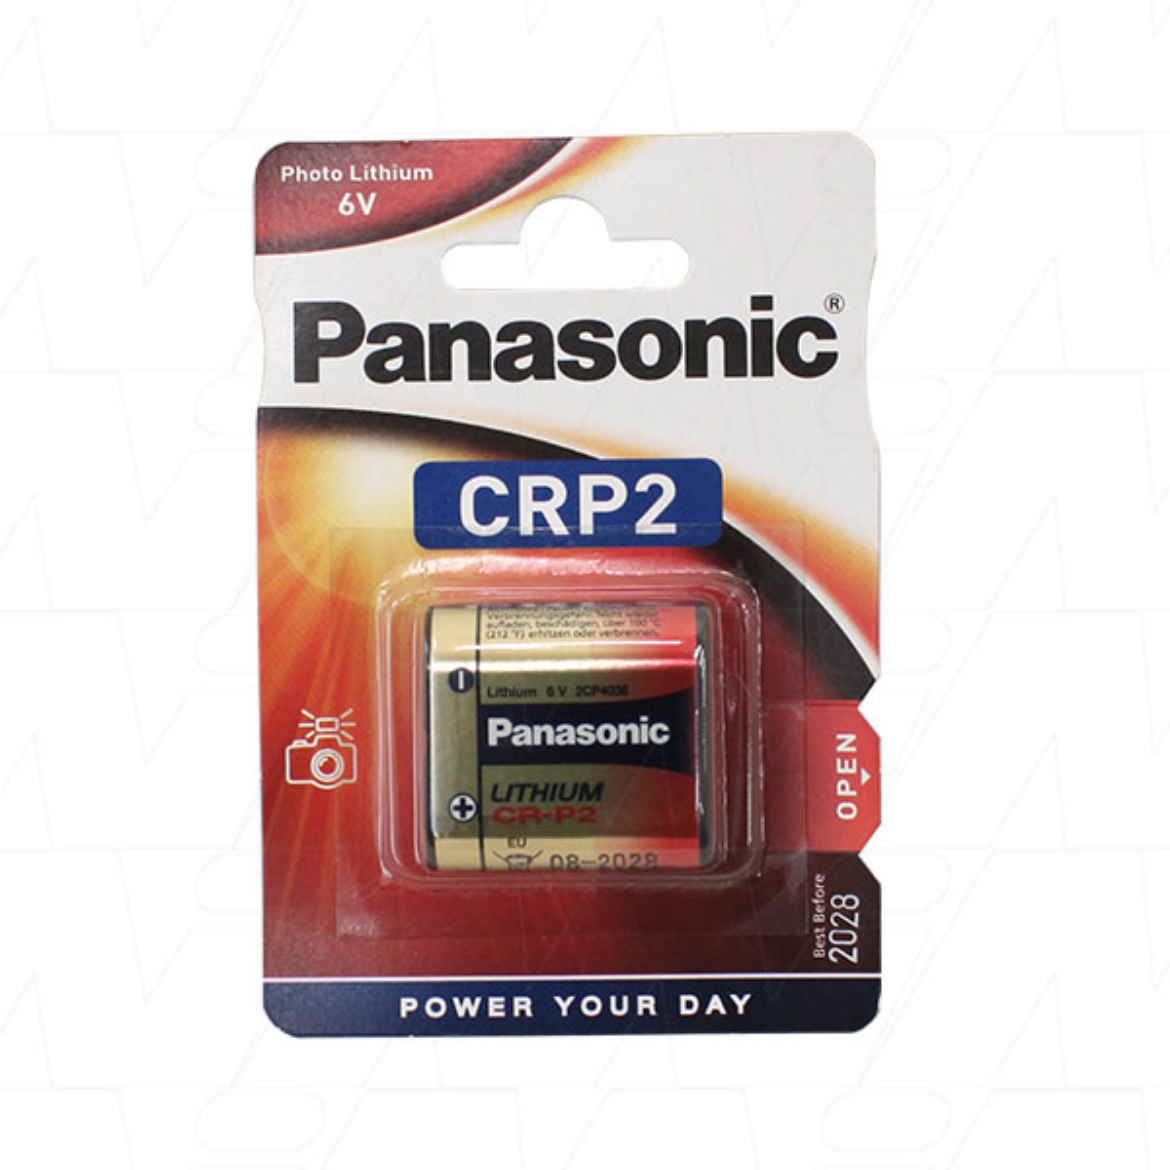 Picture of CR-P2 PANASONIC 6V LITHIUM BATTERY